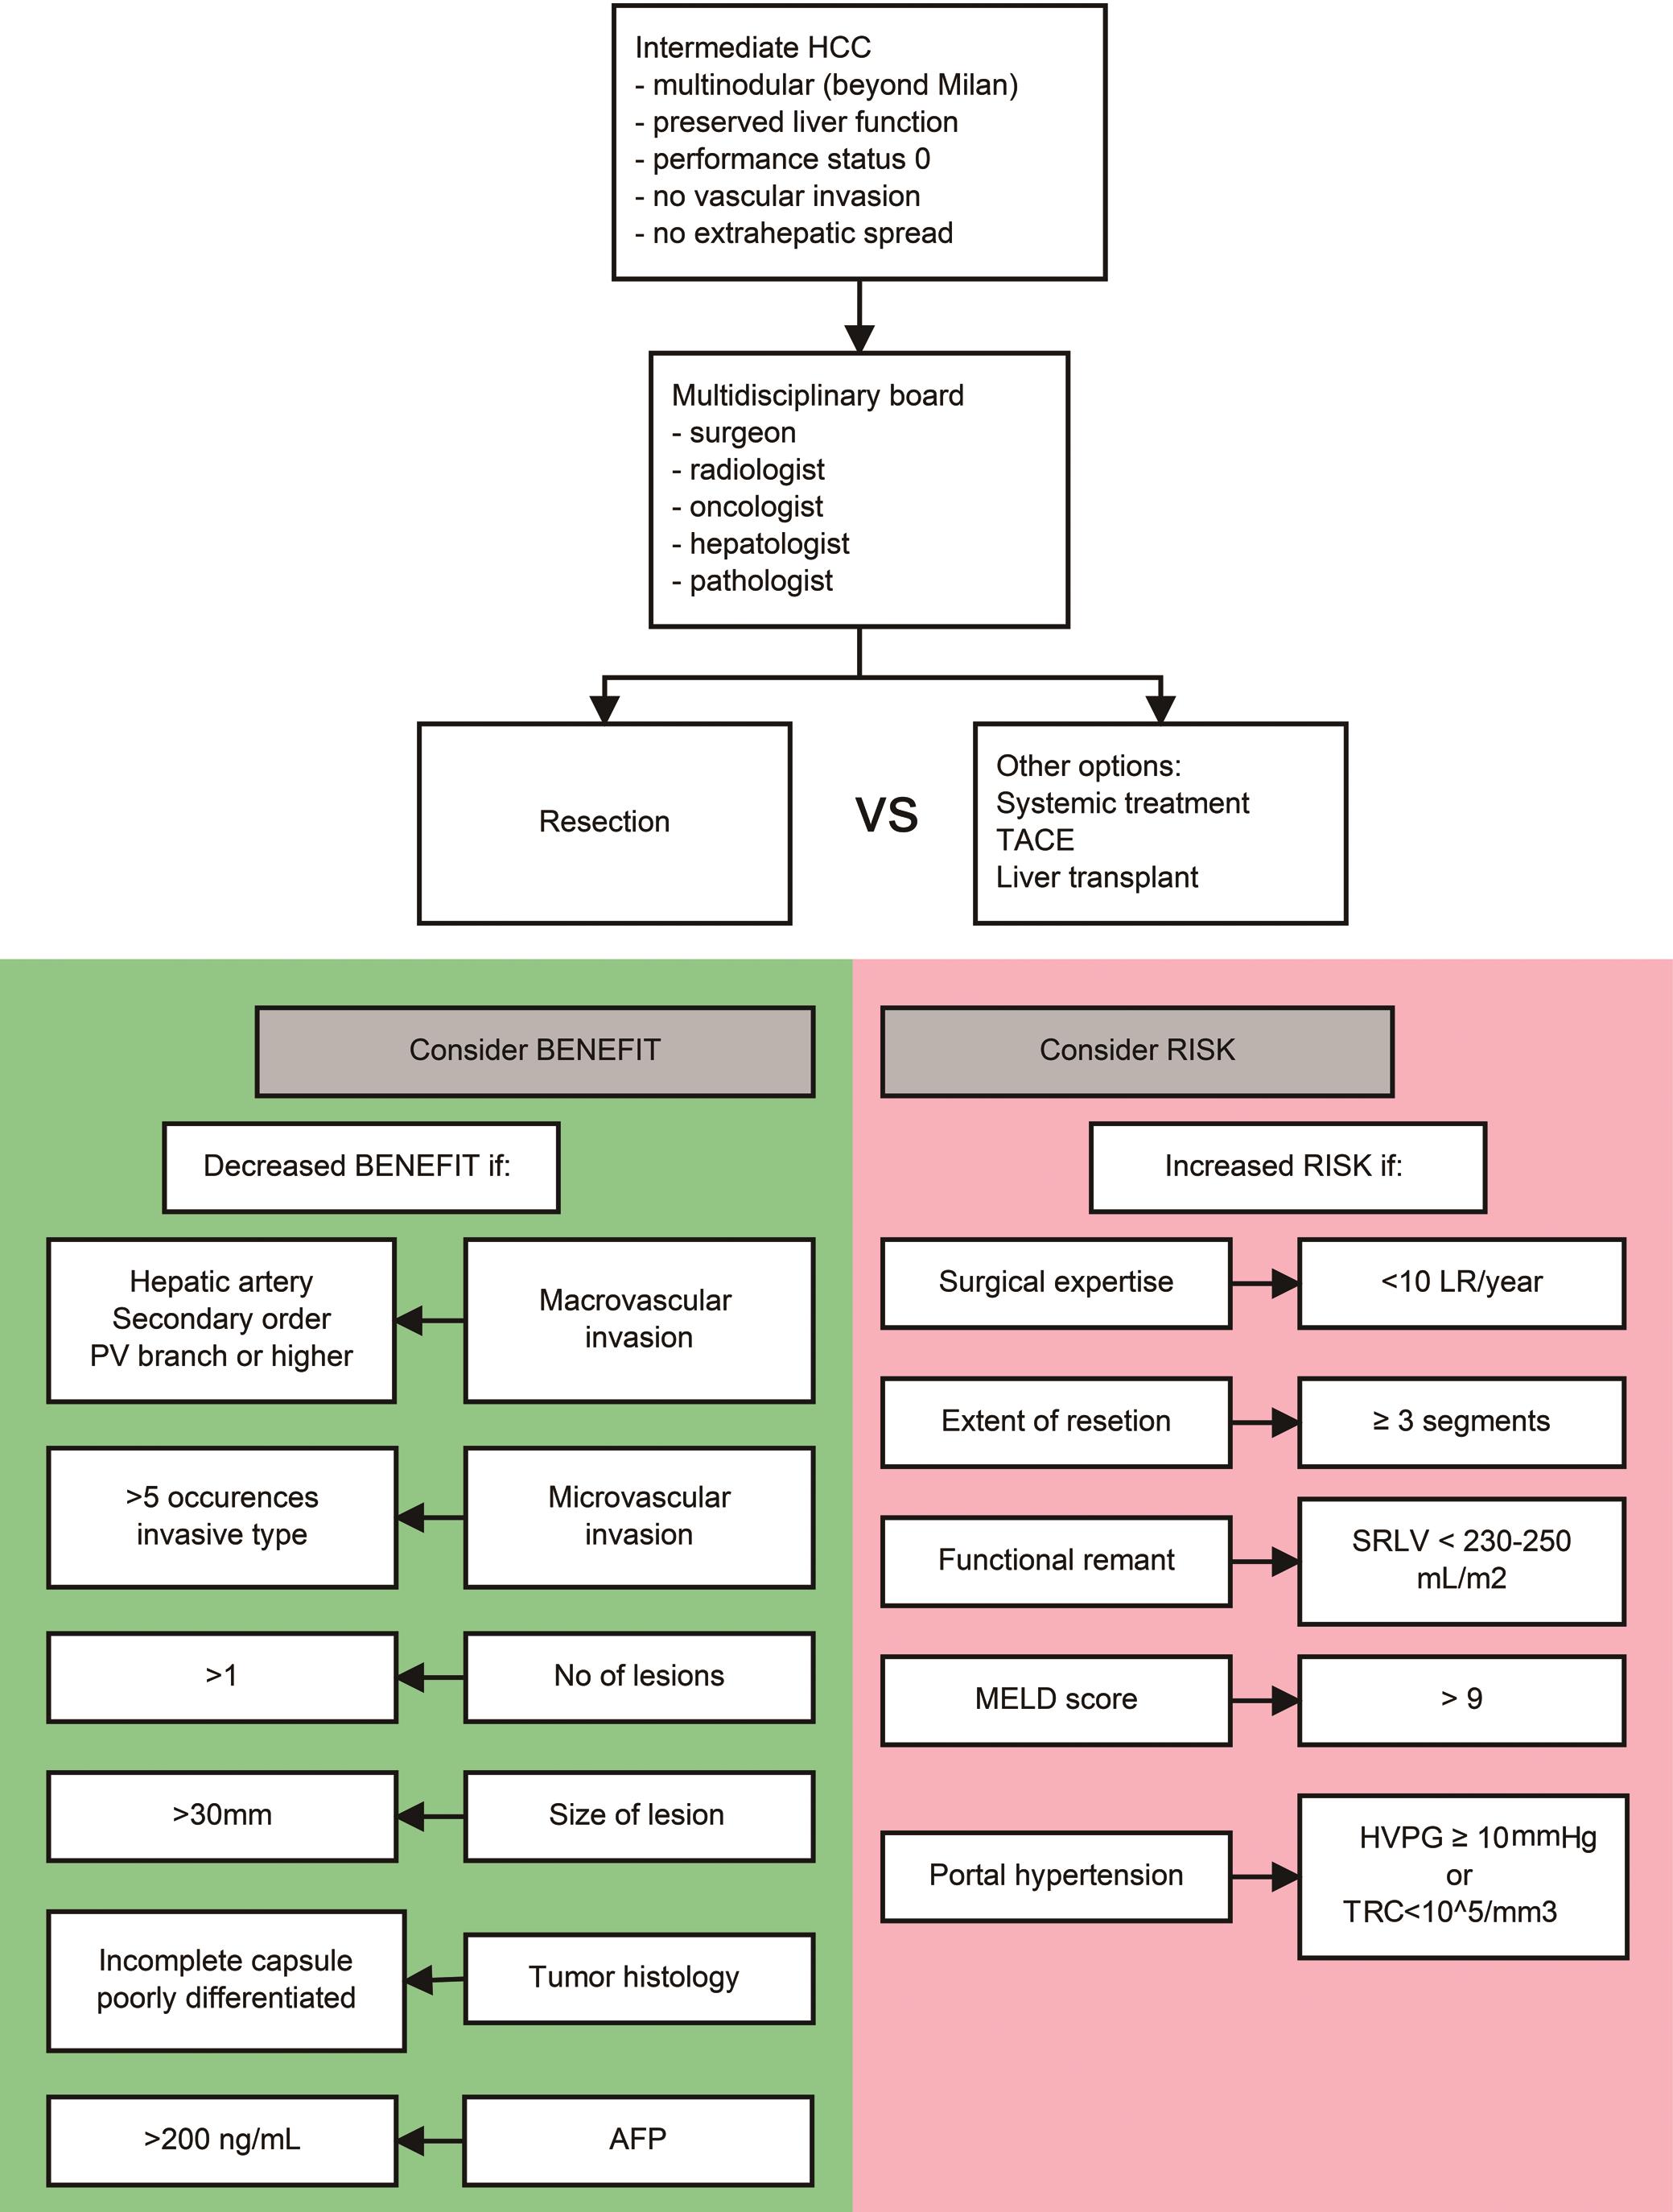 Decision-making algorithm for the management of large intermediate hepatocellular carcinoma.